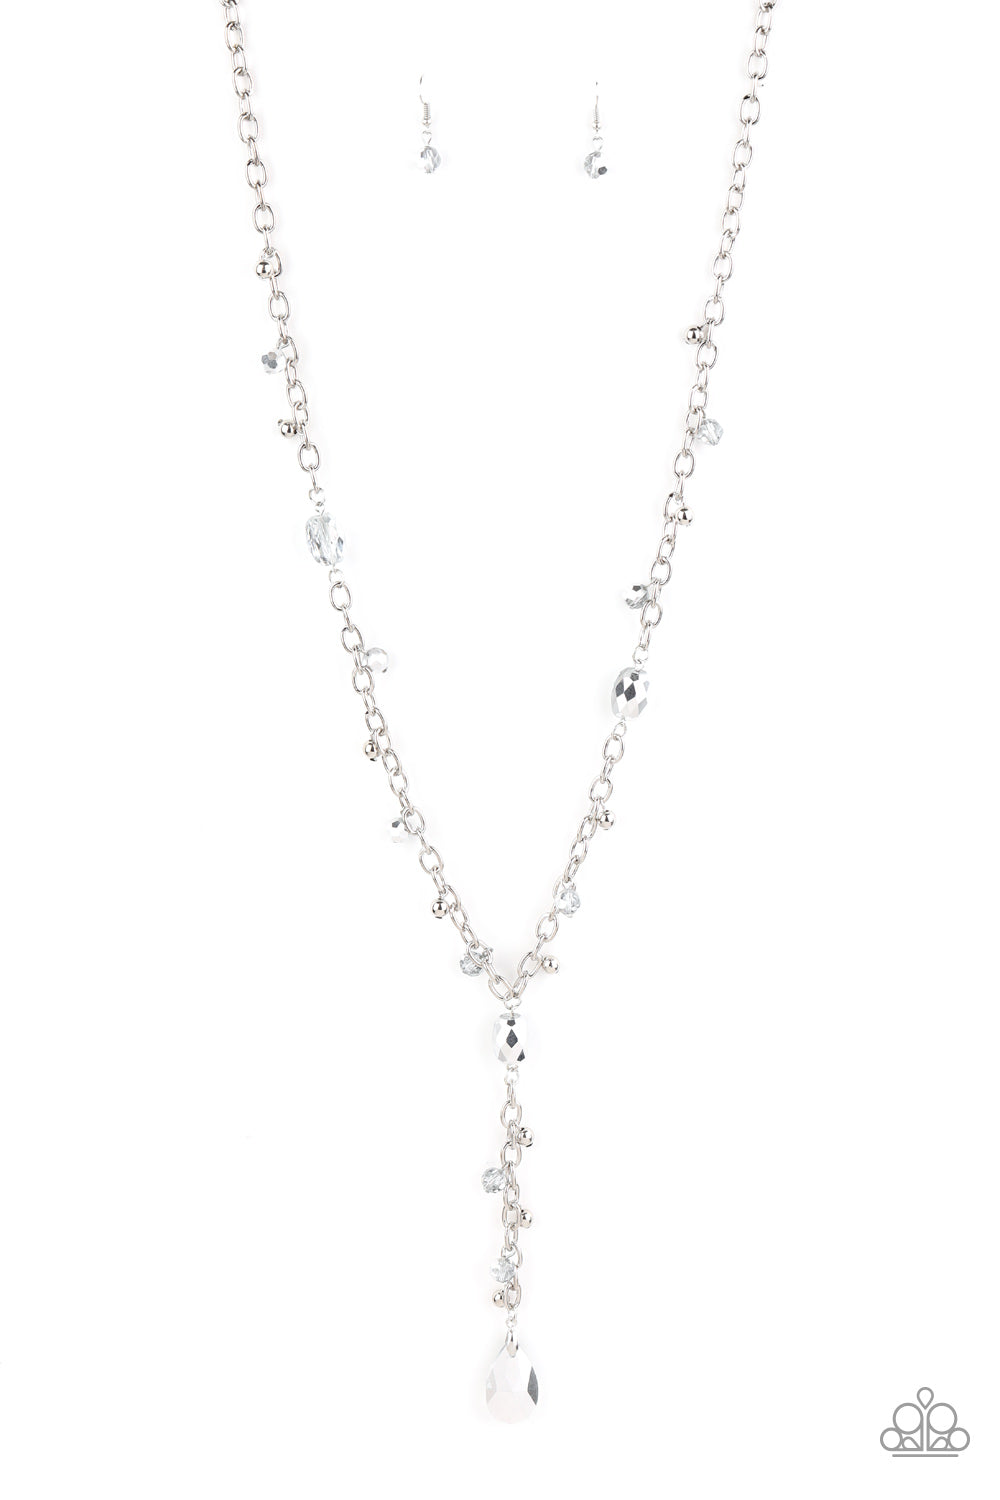 Afterglow Party - Silver Necklace Set